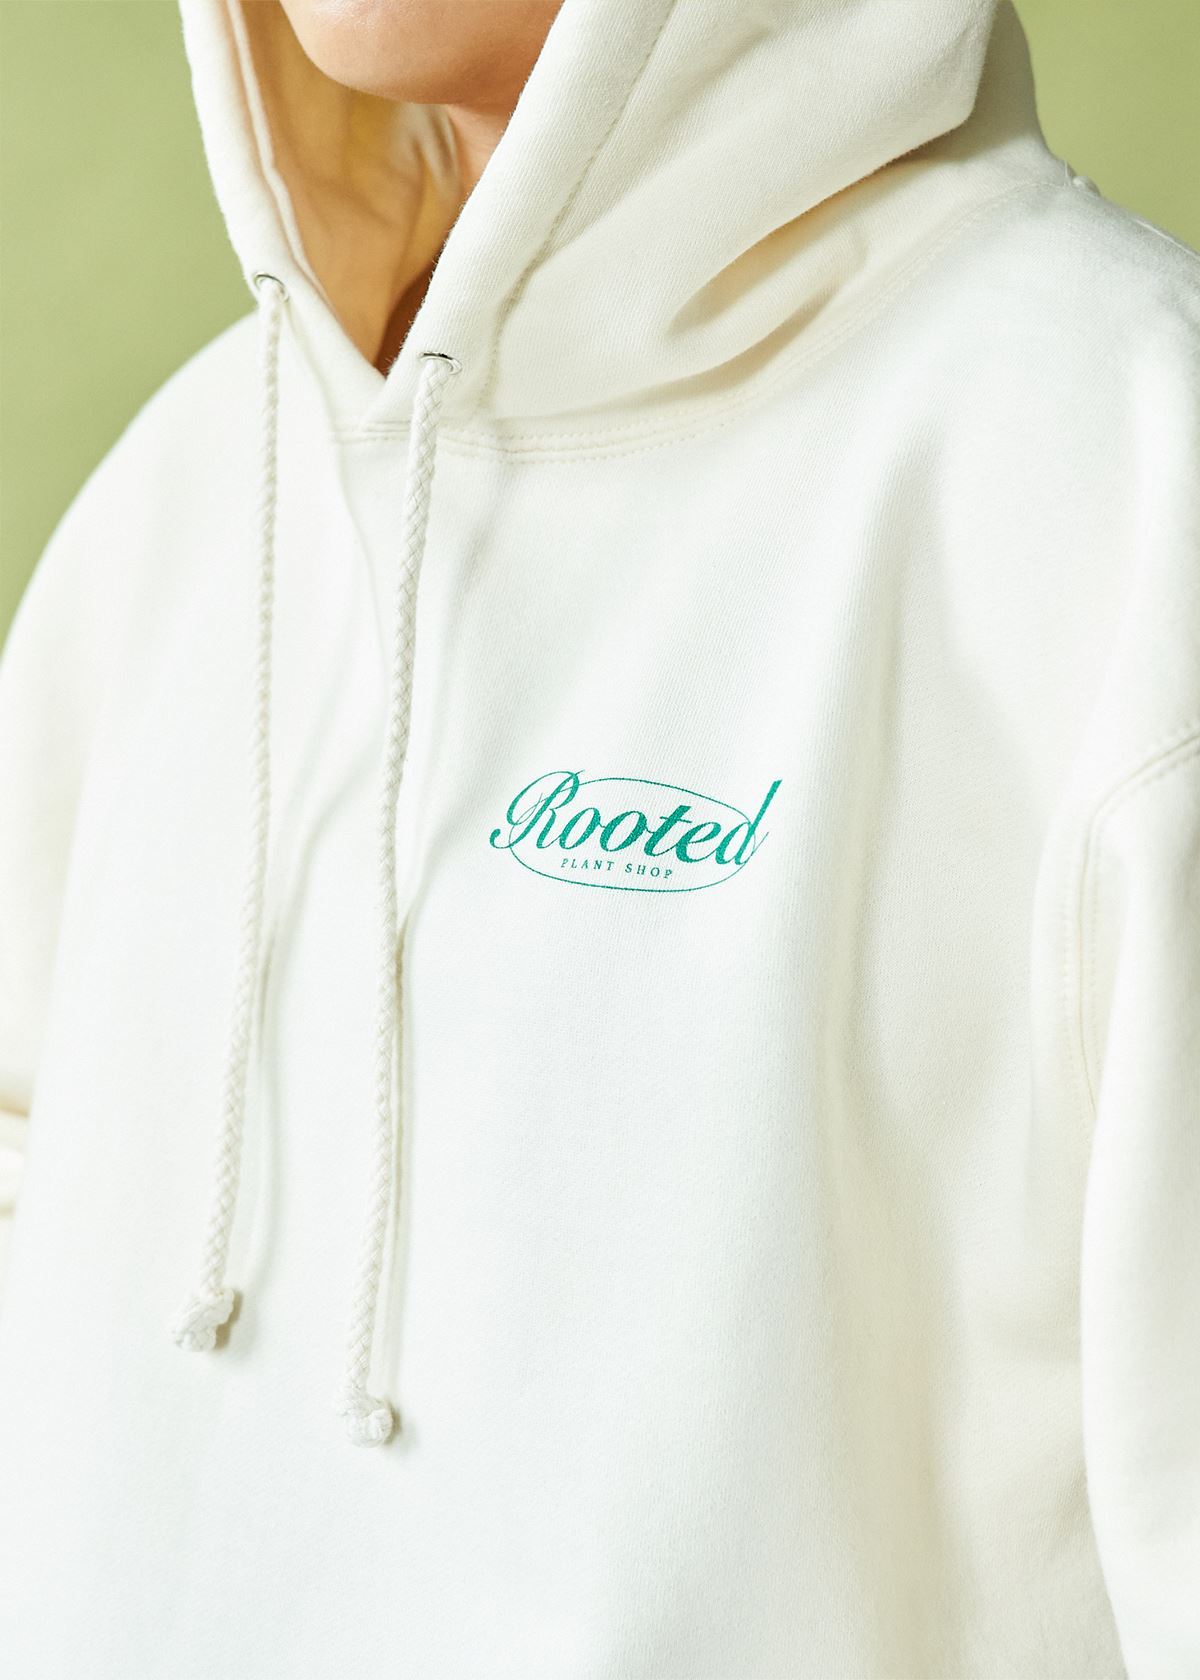 Rooted Plant Shop Hoodie Merchandise Rooted 